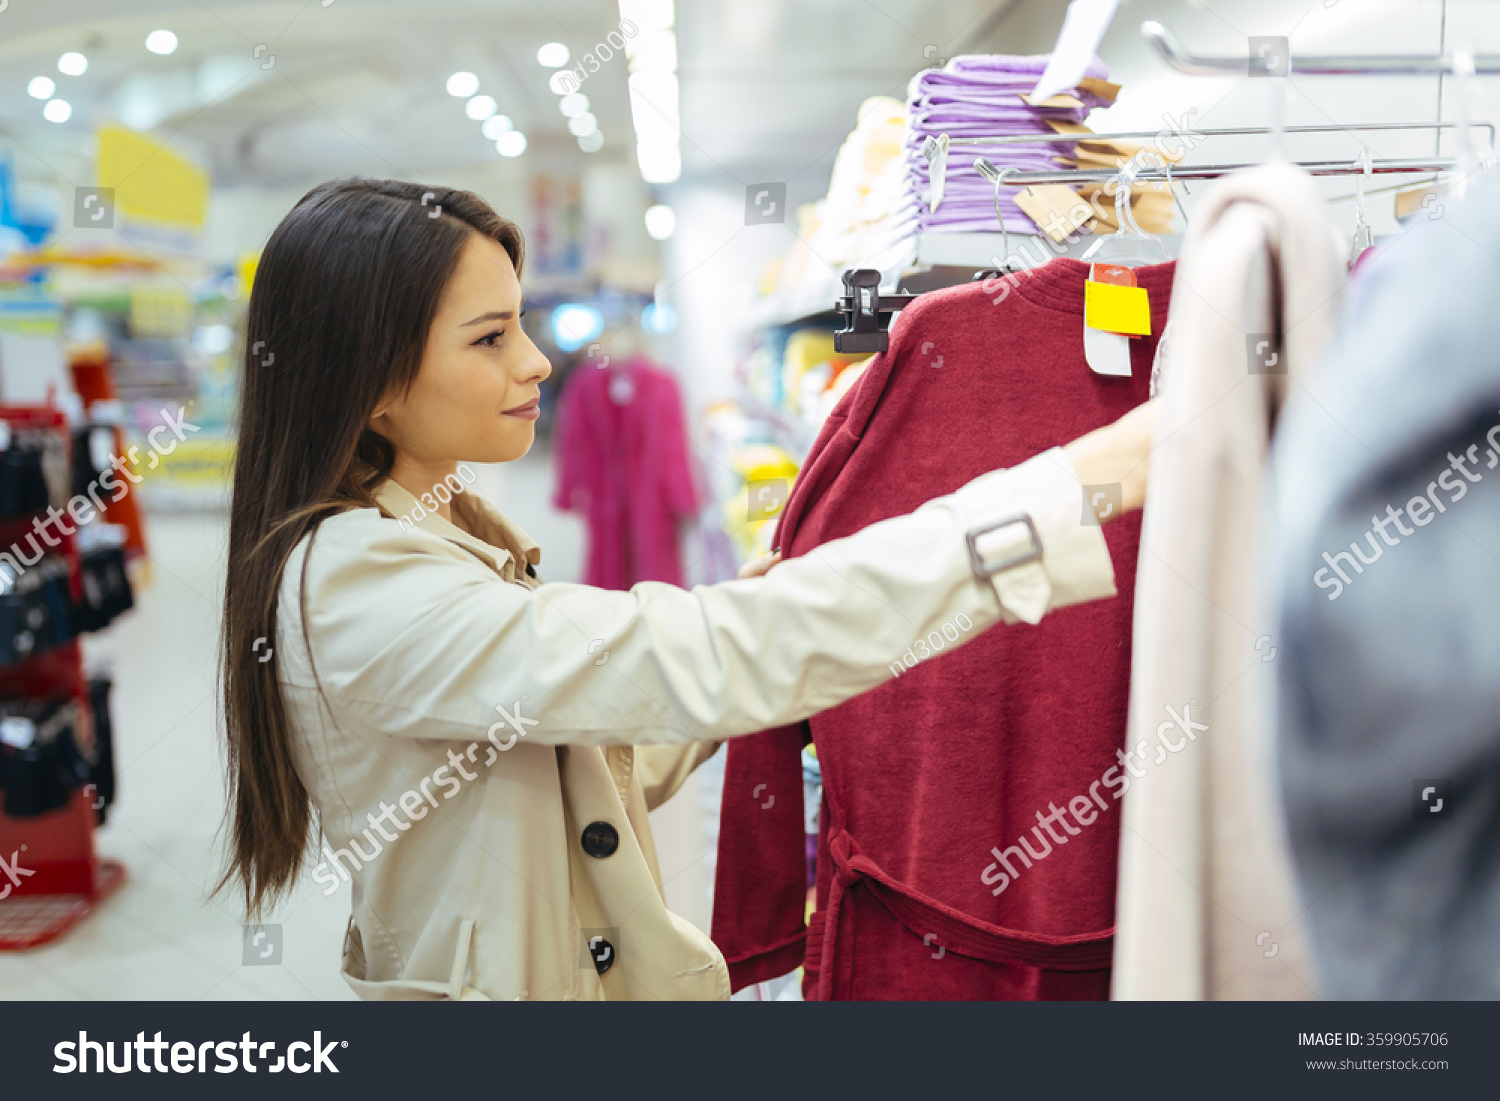 Beautiful woman glancing through clothes #359905706